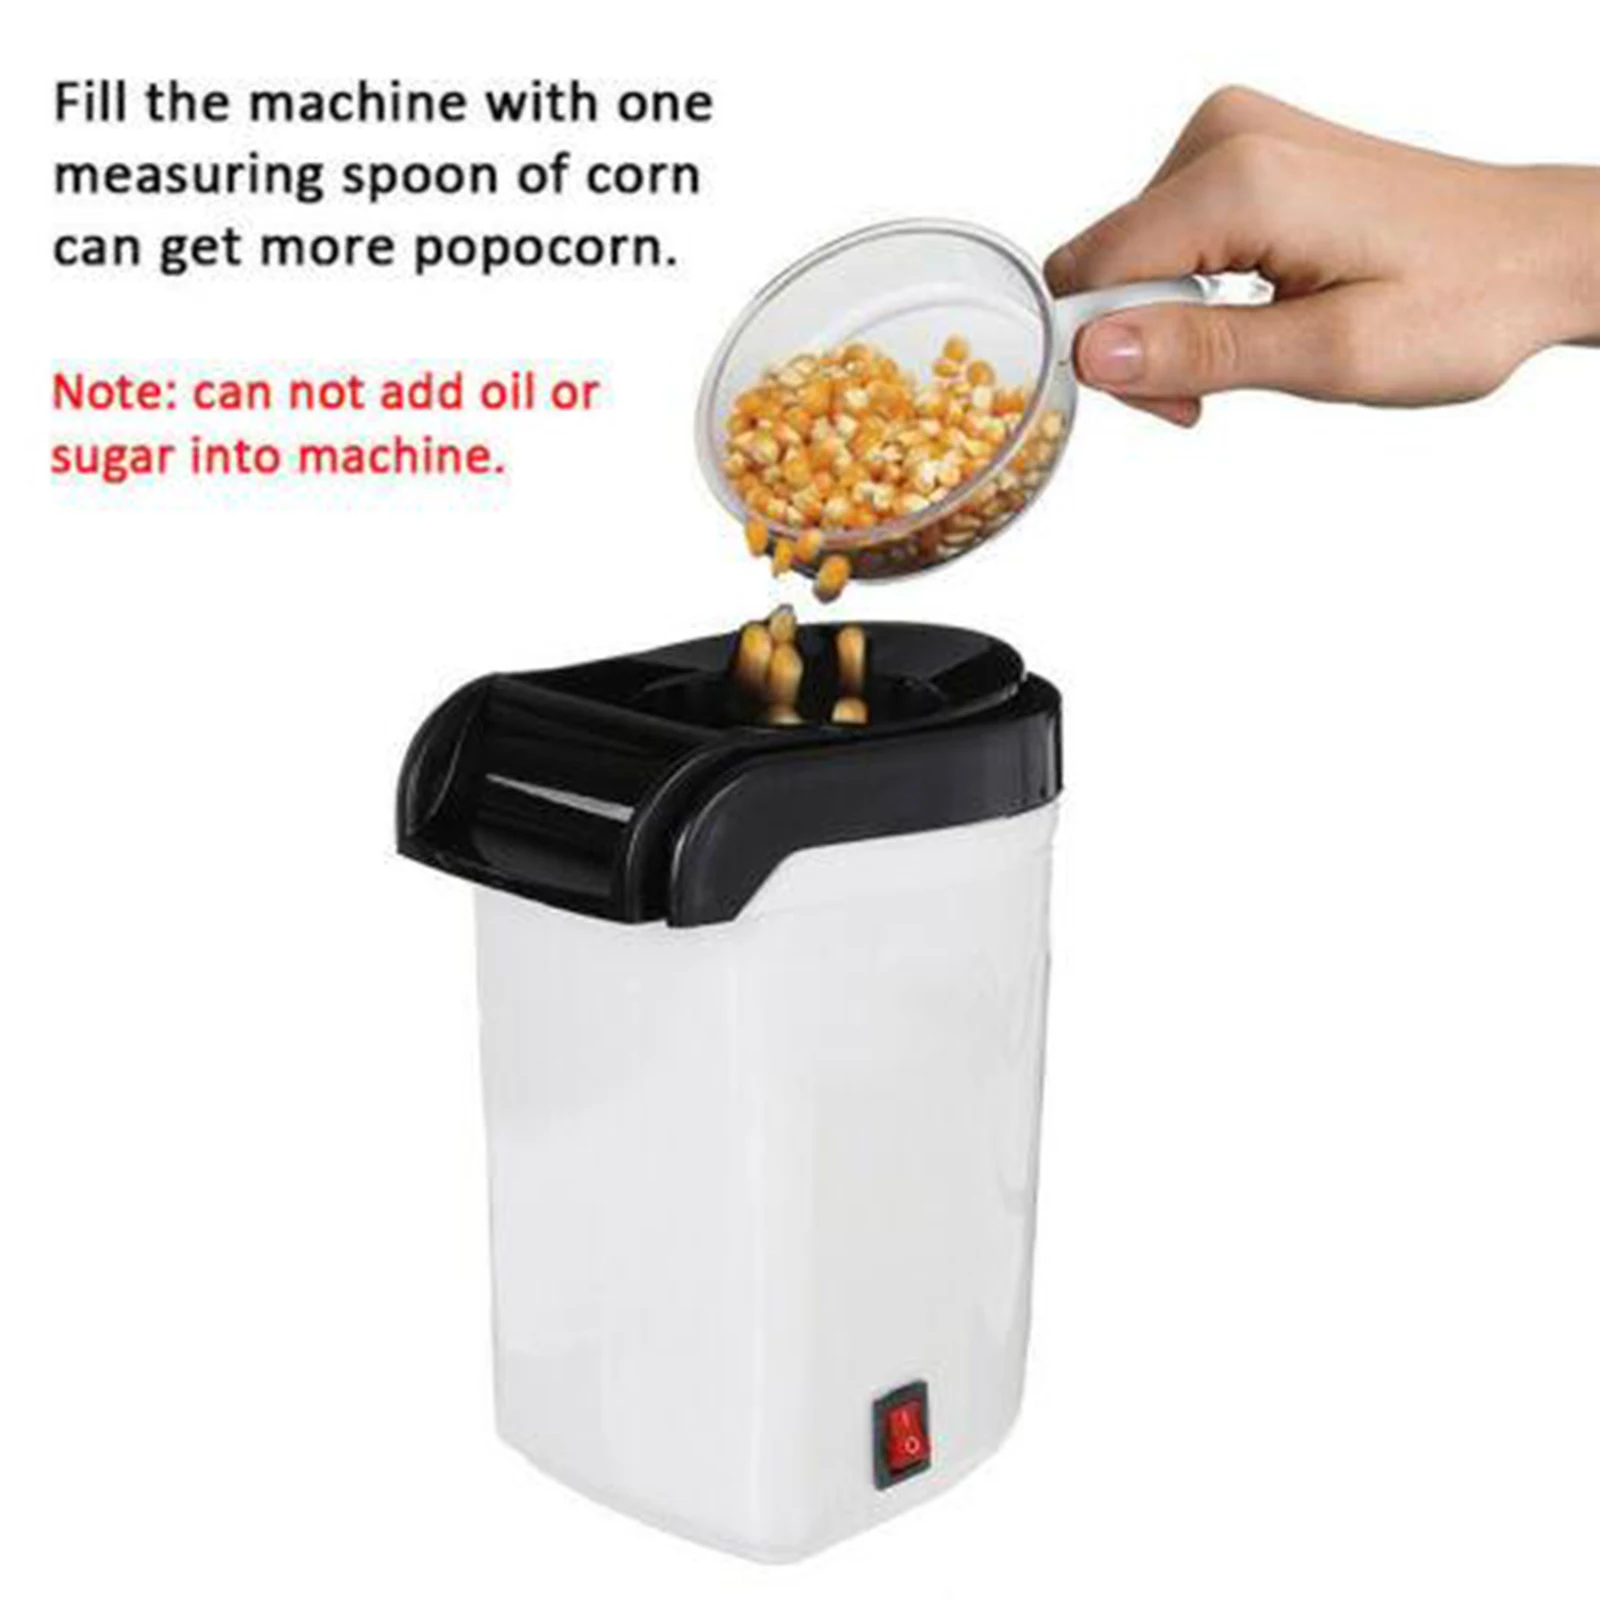 Hot Air Popcorn Machine Fast Popcorn Popper for Home Family Kitchen Gadgets